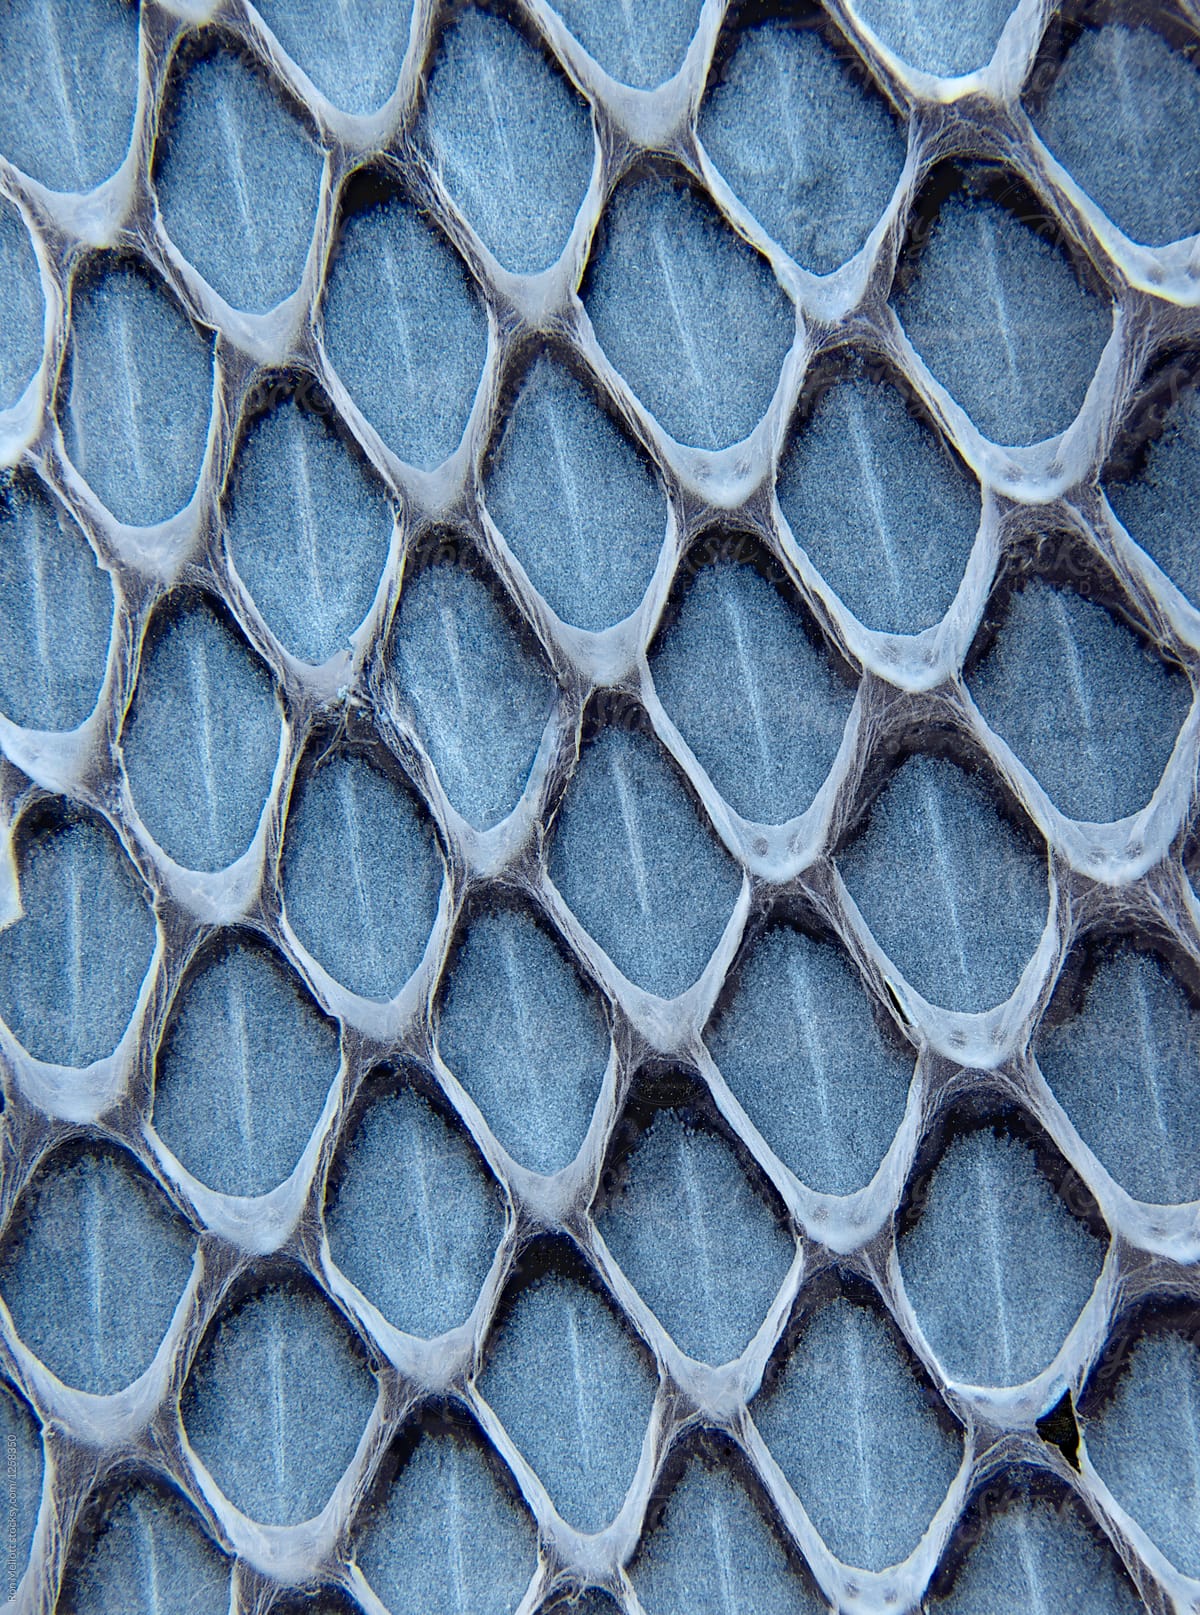 closeup in the patterns of a shed snake skin snakeskin